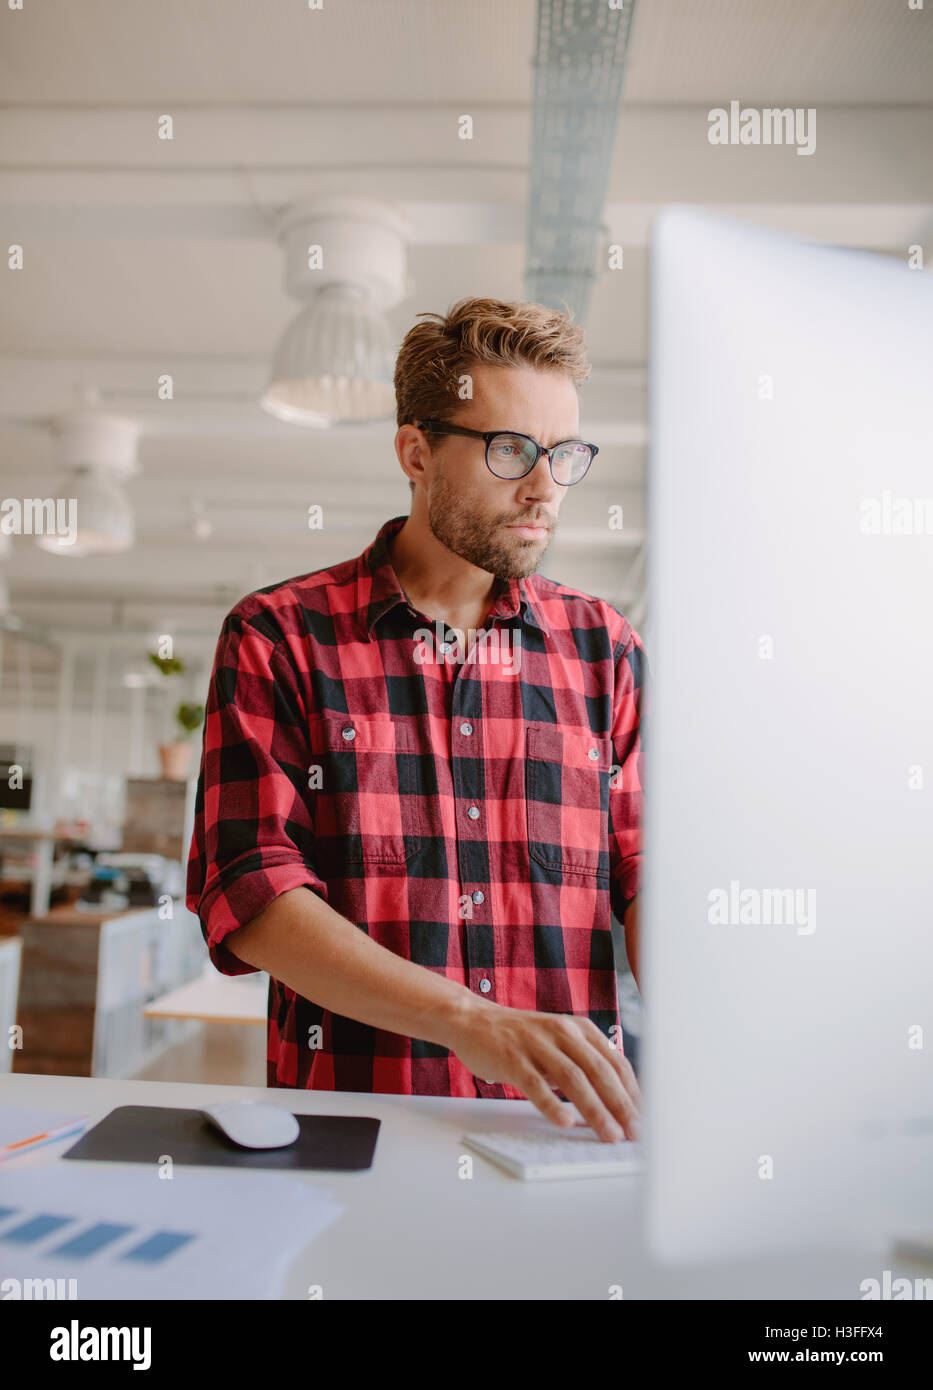 Vertical shot of young man working on computer. Businessman concentrating on his work in modern office. Stock Photo